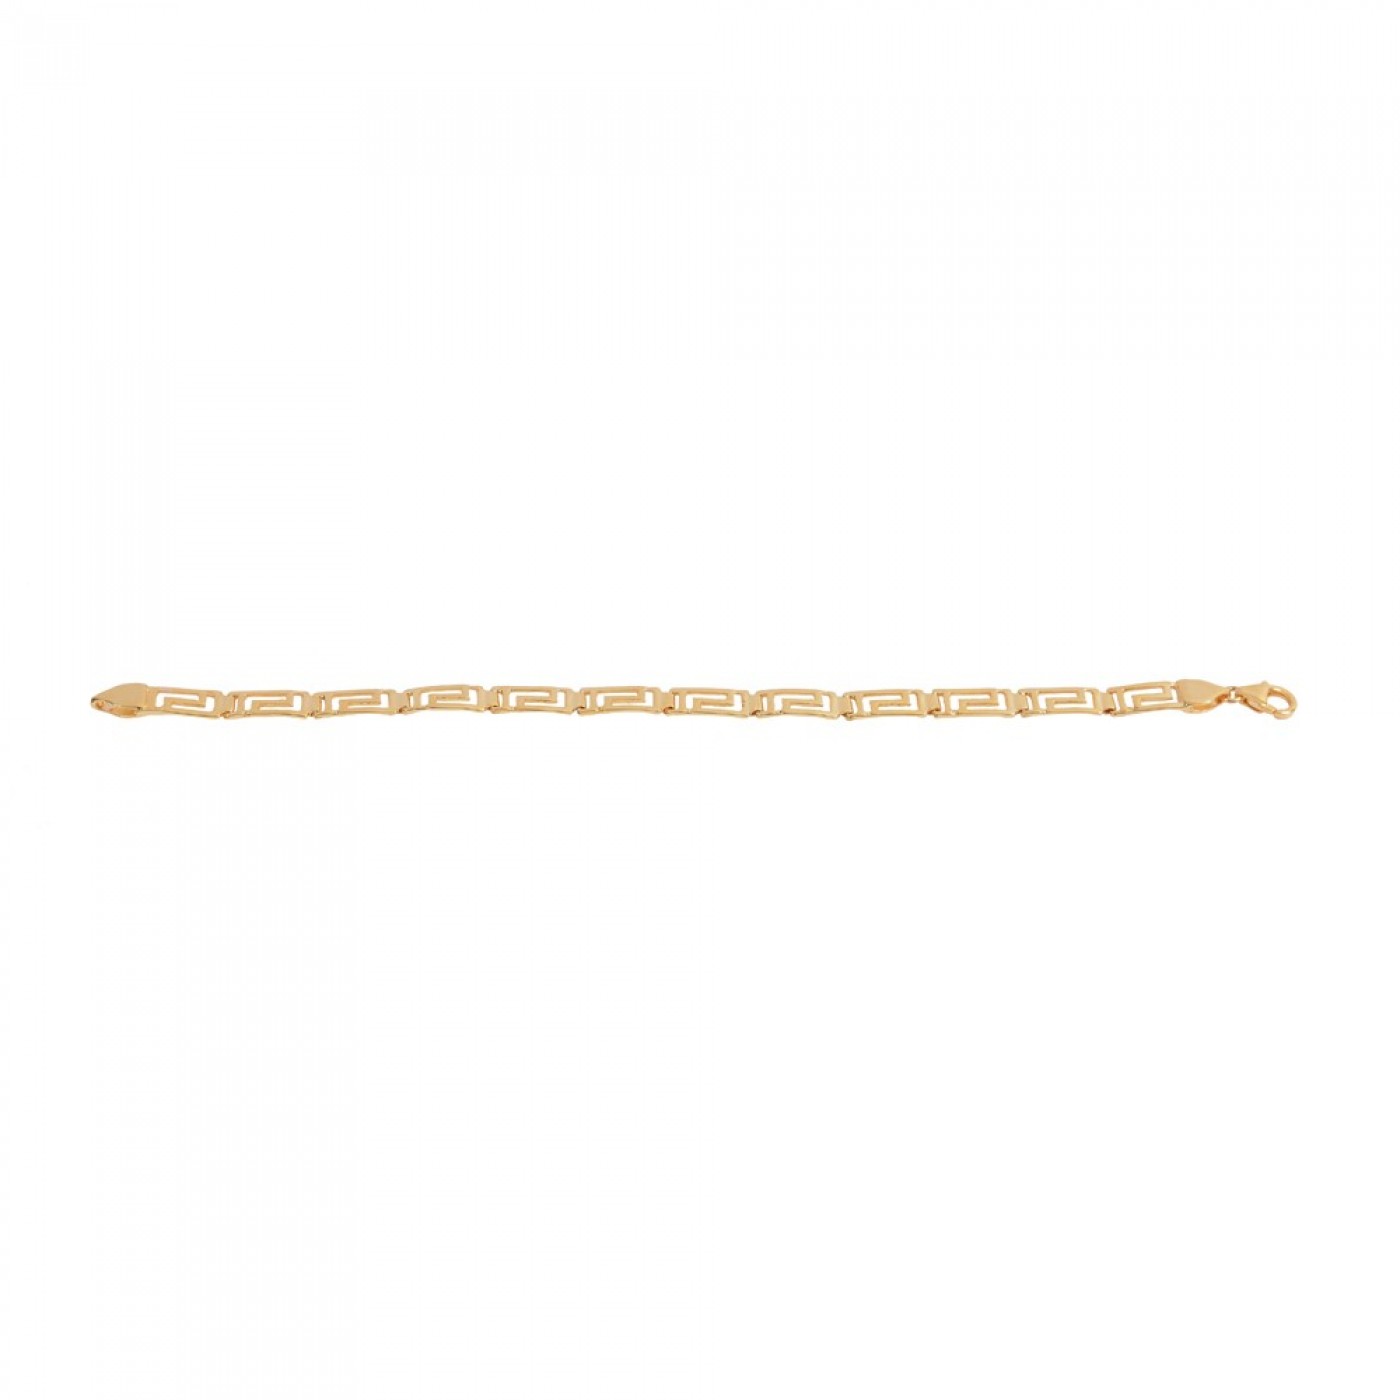 Silver gold plated bracelet with meander